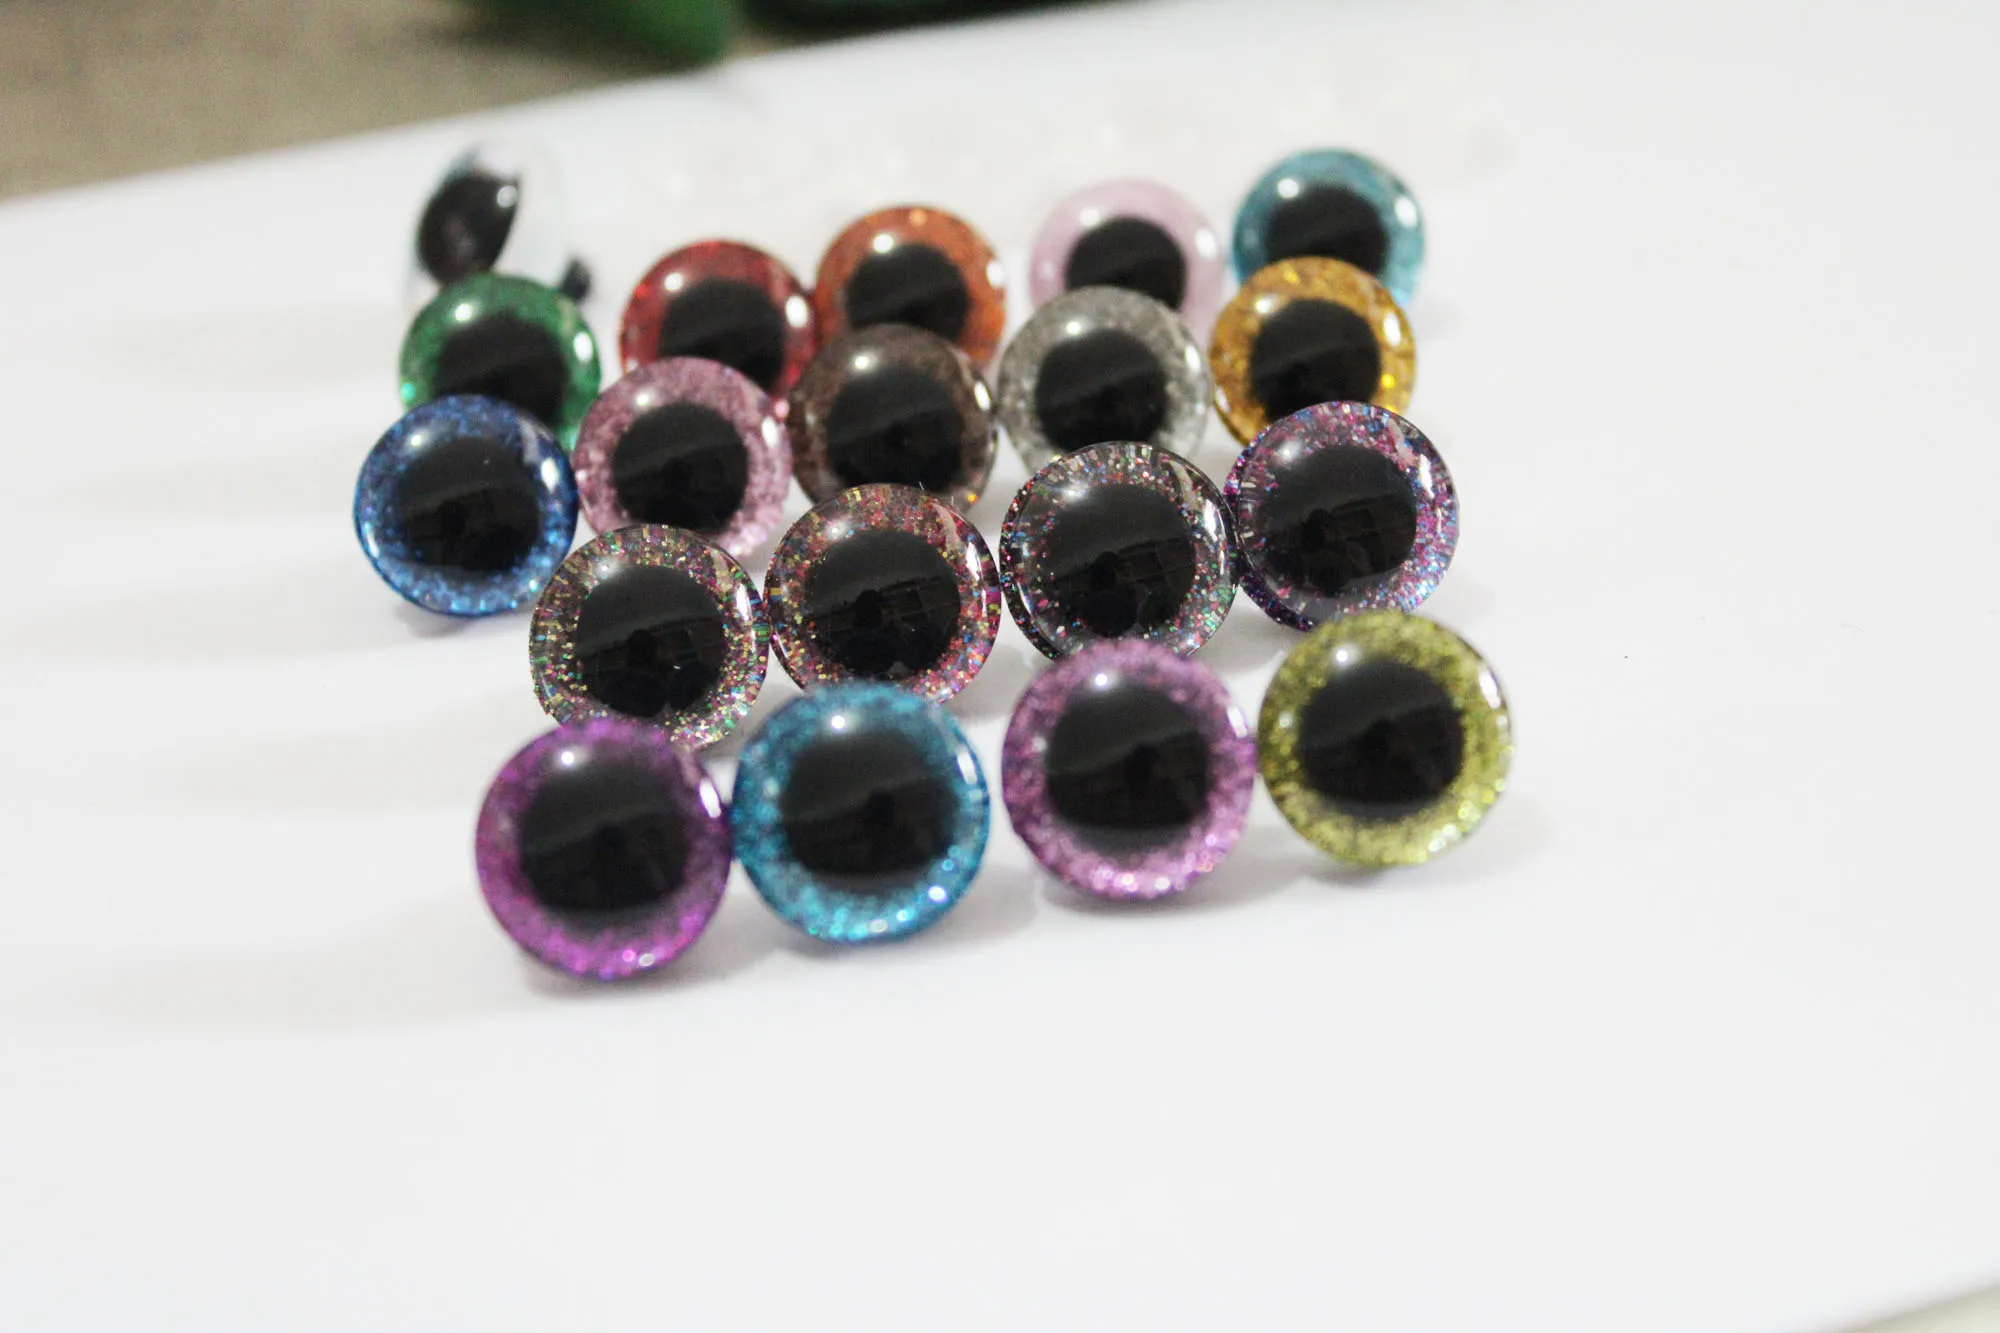 

40pcs/lot 14mm/16mm/20mm/24mm 3D clear glitter toy eyes + glitter fabric+ washer for diy plush toy doll--18 colors option--N18